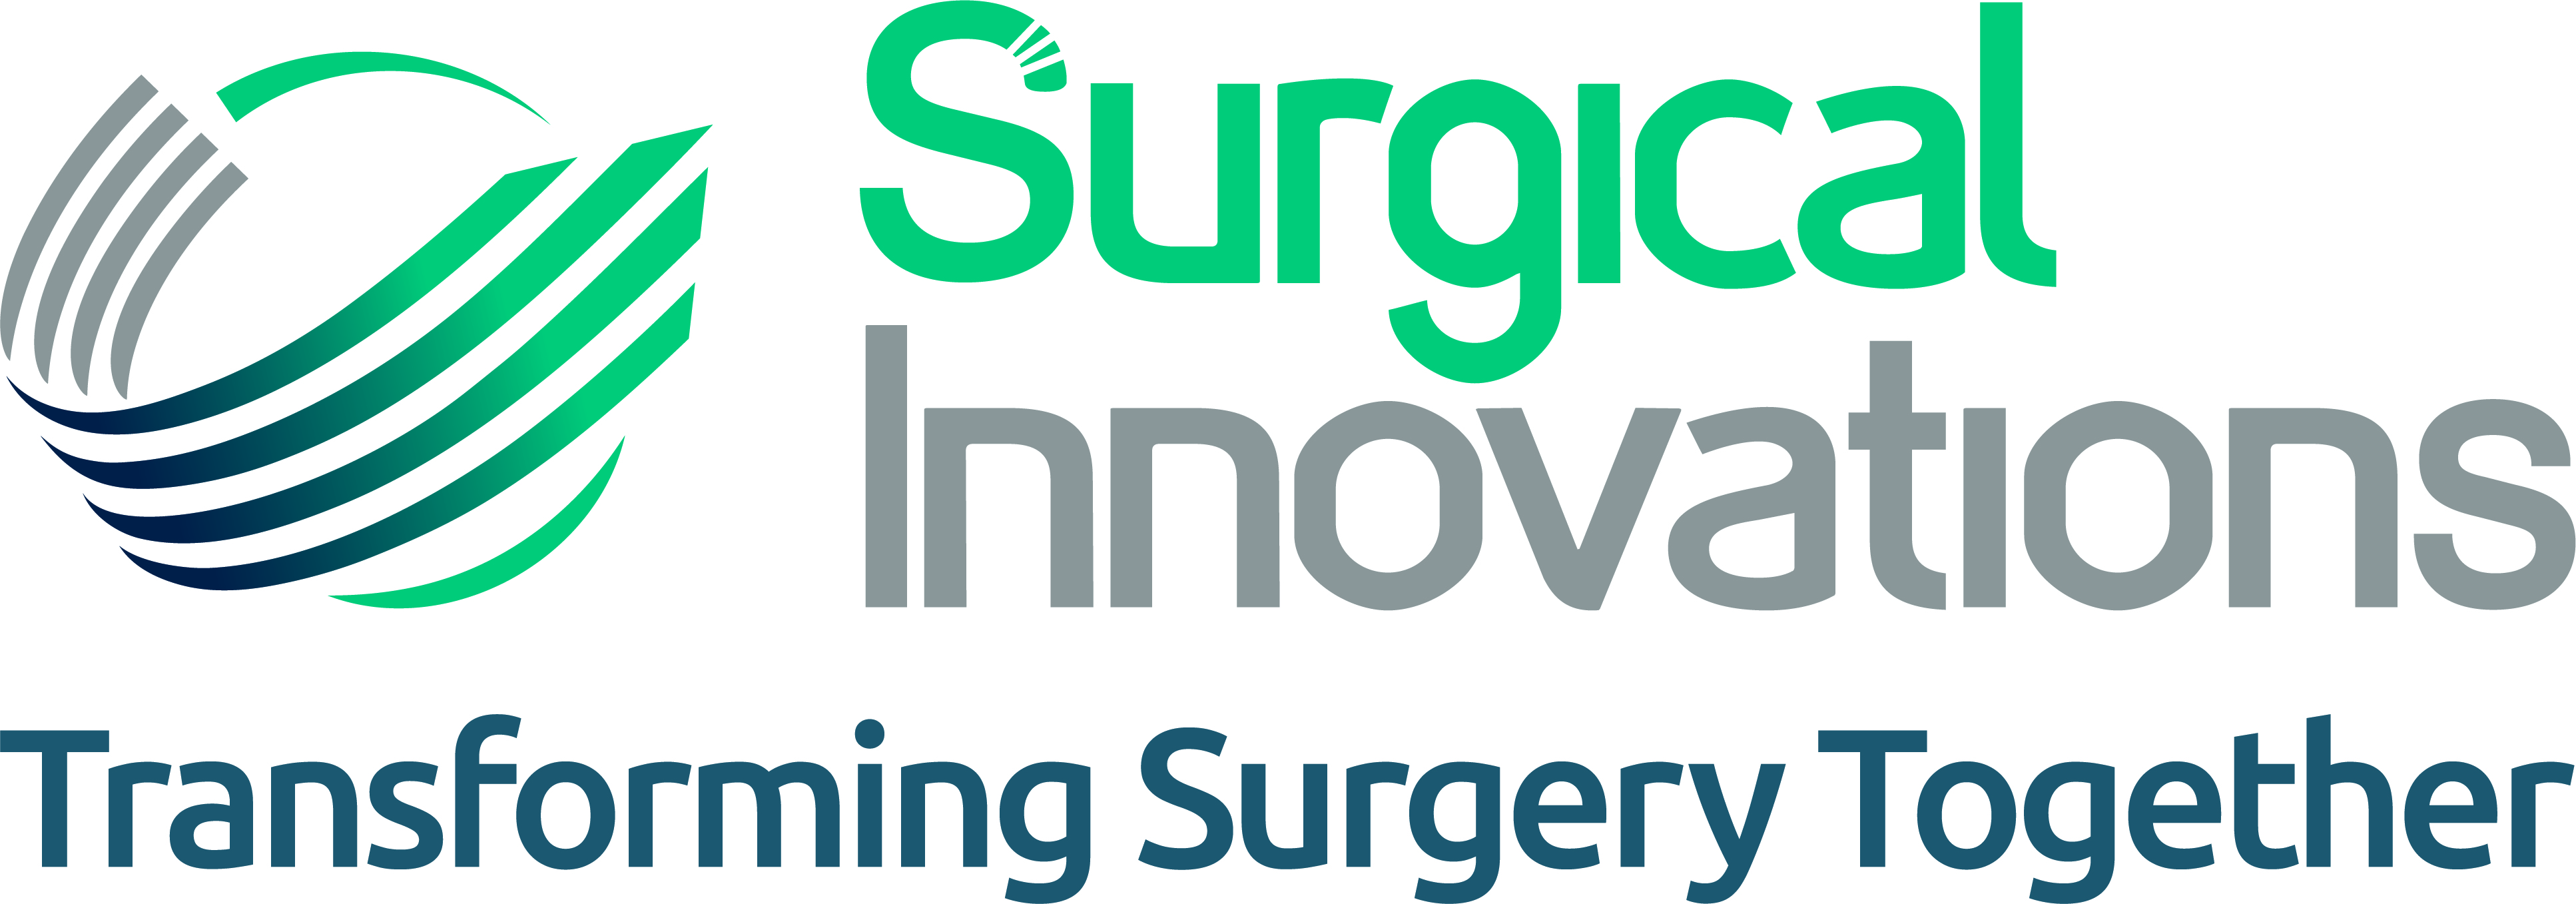 Surgical Innovations logo